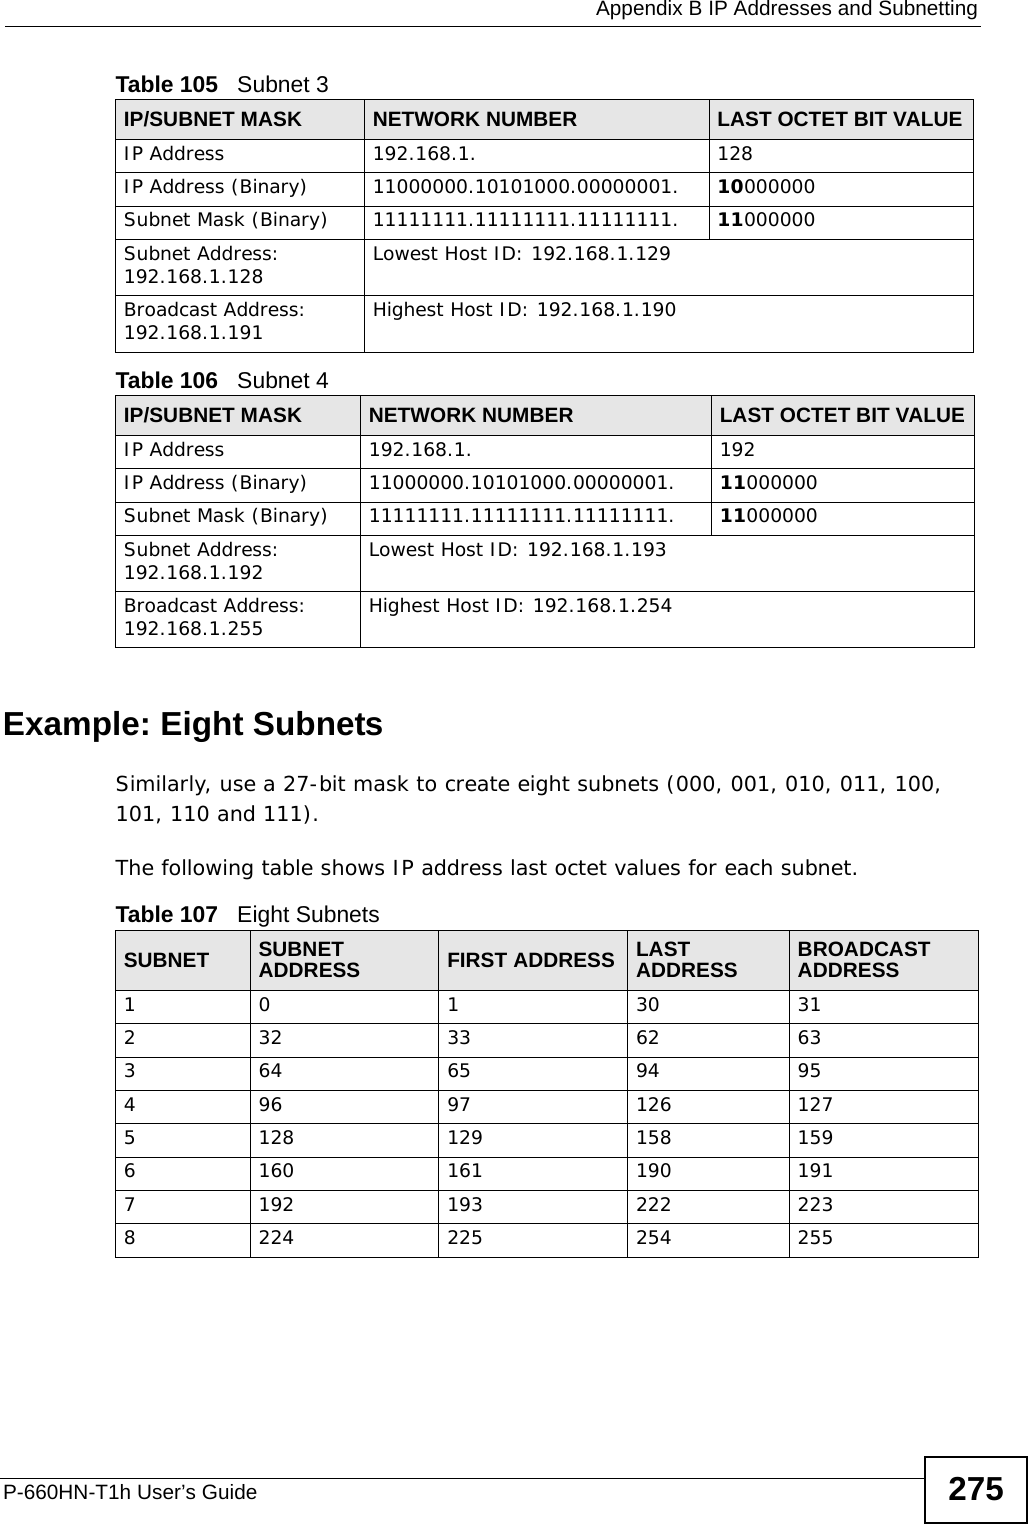  Appendix B IP Addresses and SubnettingP-660HN-T1h User’s Guide 275Example: Eight SubnetsSimilarly, use a 27-bit mask to create eight subnets (000, 001, 010, 011, 100, 101, 110 and 111). The following table shows IP address last octet values for each subnet.Table 105   Subnet 3IP/SUBNET MASK NETWORK NUMBER LAST OCTET BIT VALUEIP Address 192.168.1. 128IP Address (Binary) 11000000.10101000.00000001. 10000000Subnet Mask (Binary) 11111111.11111111.11111111. 11000000Subnet Address: 192.168.1.128 Lowest Host ID: 192.168.1.129Broadcast Address: 192.168.1.191 Highest Host ID: 192.168.1.190Table 106   Subnet 4IP/SUBNET MASK NETWORK NUMBER LAST OCTET BIT VALUEIP Address 192.168.1. 192IP Address (Binary) 11000000.10101000.00000001. 11000000Subnet Mask (Binary) 11111111.11111111.11111111. 11000000Subnet Address: 192.168.1.192 Lowest Host ID: 192.168.1.193Broadcast Address: 192.168.1.255 Highest Host ID: 192.168.1.254Table 107   Eight SubnetsSUBNET SUBNET ADDRESS FIRST ADDRESS LAST ADDRESS BROADCAST ADDRESS1 0 1 30 31232 33 62 63364 65 94 95496 97 126 1275128 129 158 1596160 161 190 1917192 193 222 2238224 225 254 255